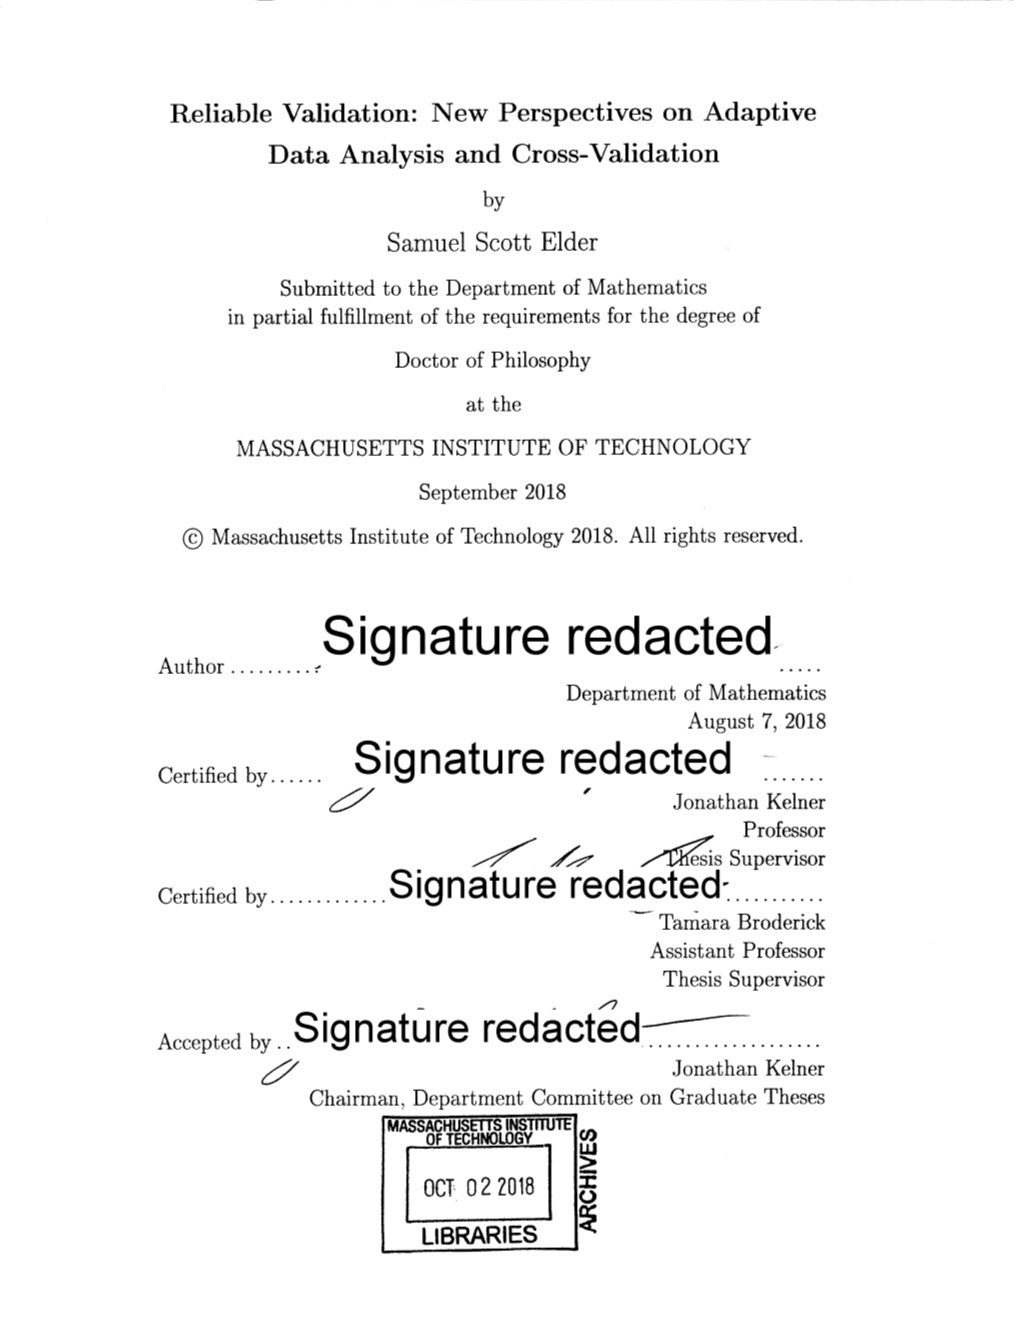 Redacted. Department of Mathematics August 7, 2018 Cetiid Y...Signature Redacted -- Certified By